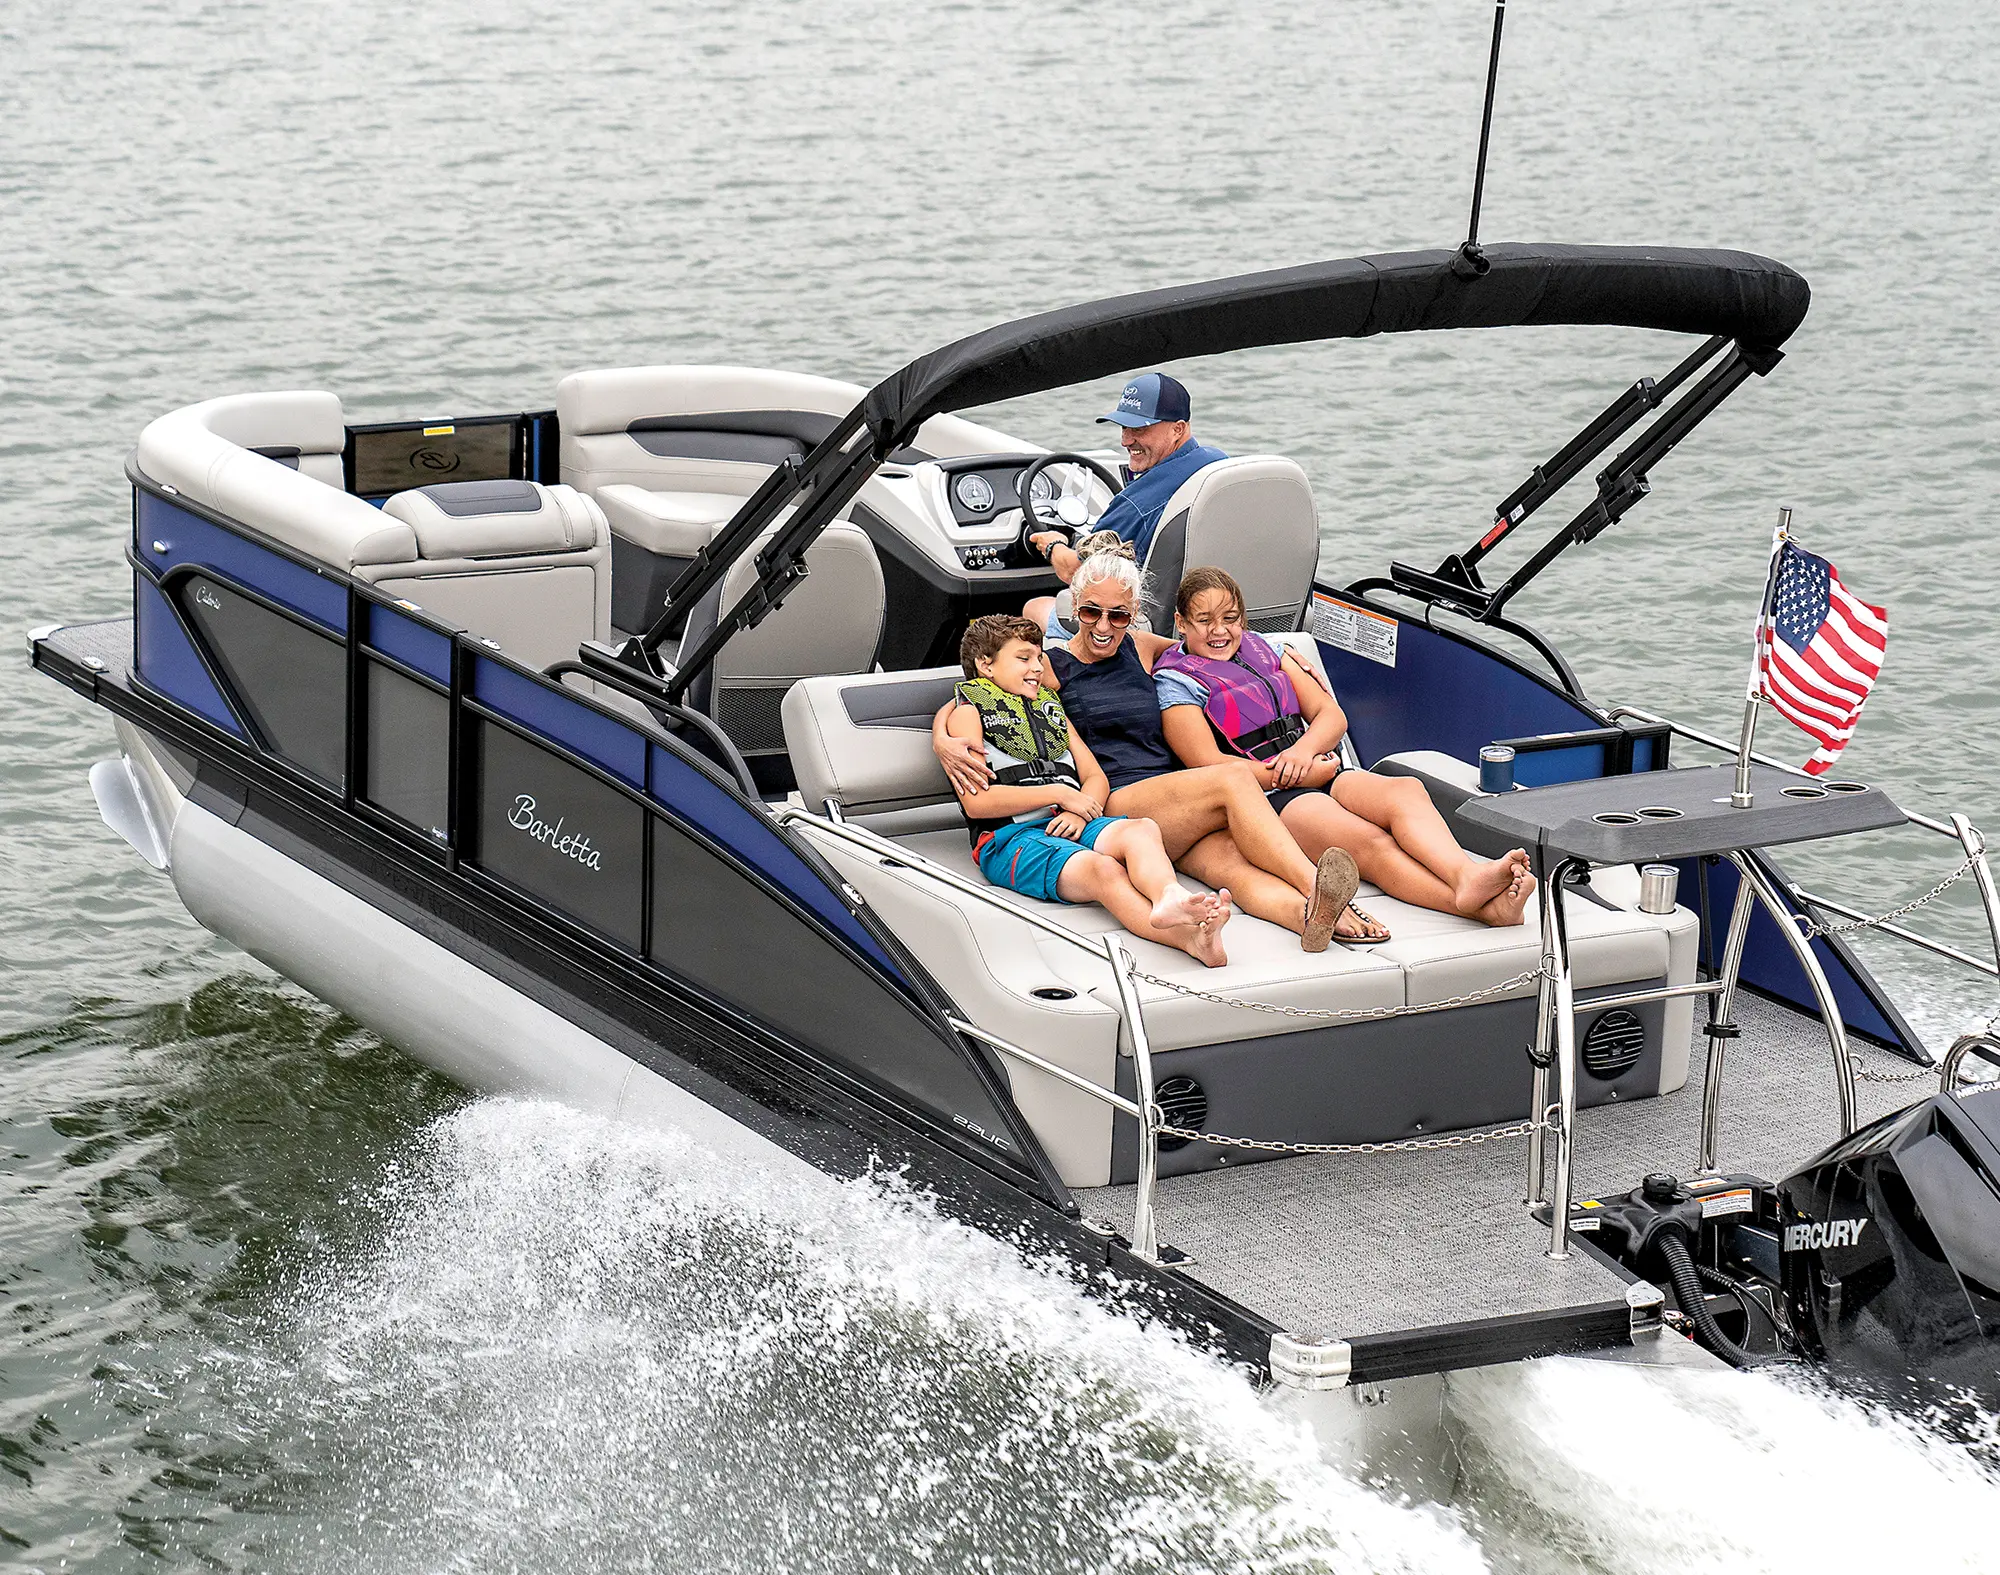 Landscape close-up photograph of a man in a dark blue button-up shirt and dark blue snapback hat in the driver's seat driving the Barletta Cabrio C22UC pontoon motorboat vehicle out in the water with a woman and children holding each other closely as they lean back and relax on a lounge couch chair